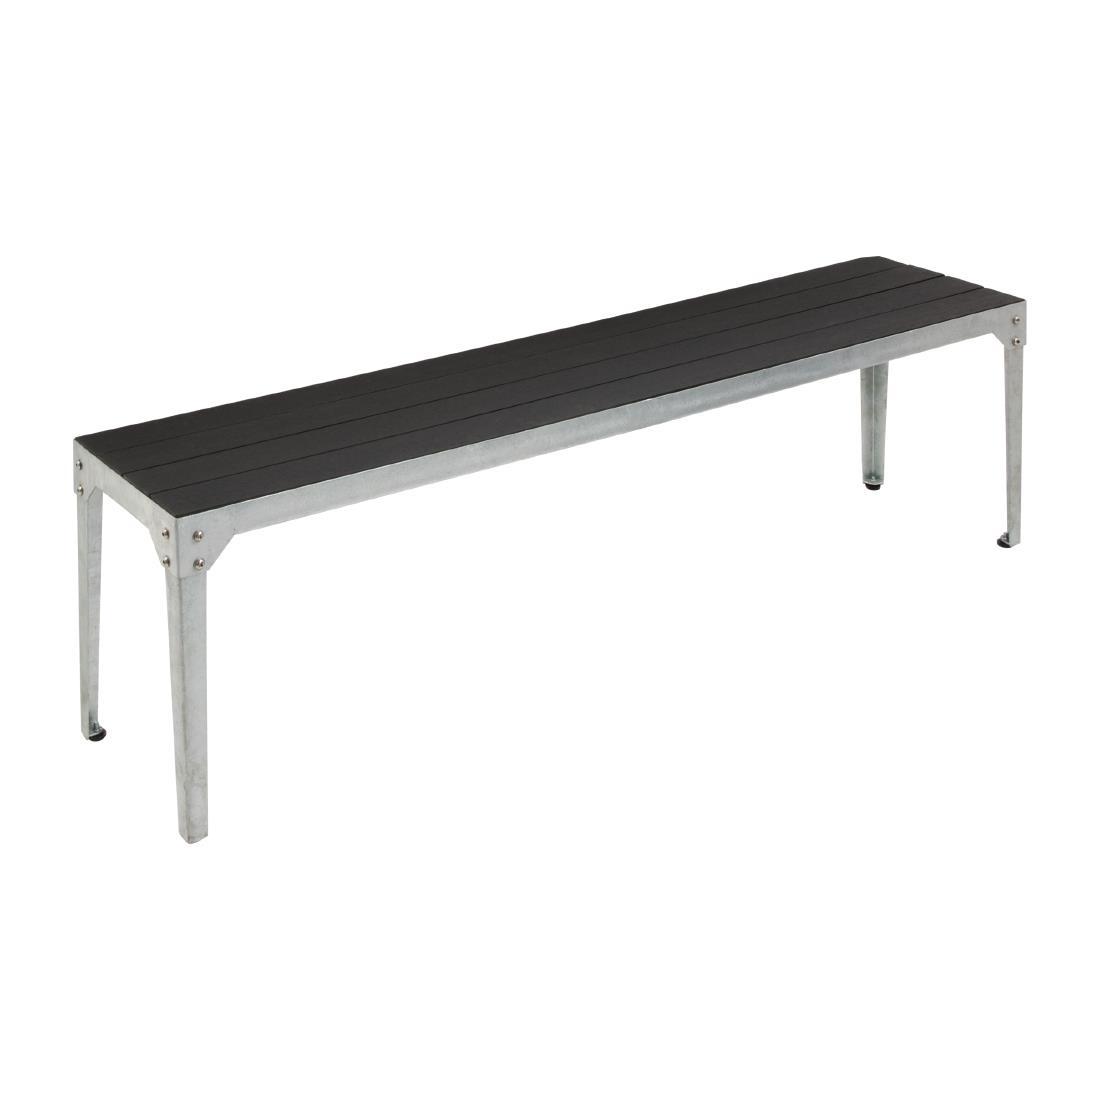 Bolero Charcoal Faux Wood and Steel Bench (Pack of 2) - DS162  - 1